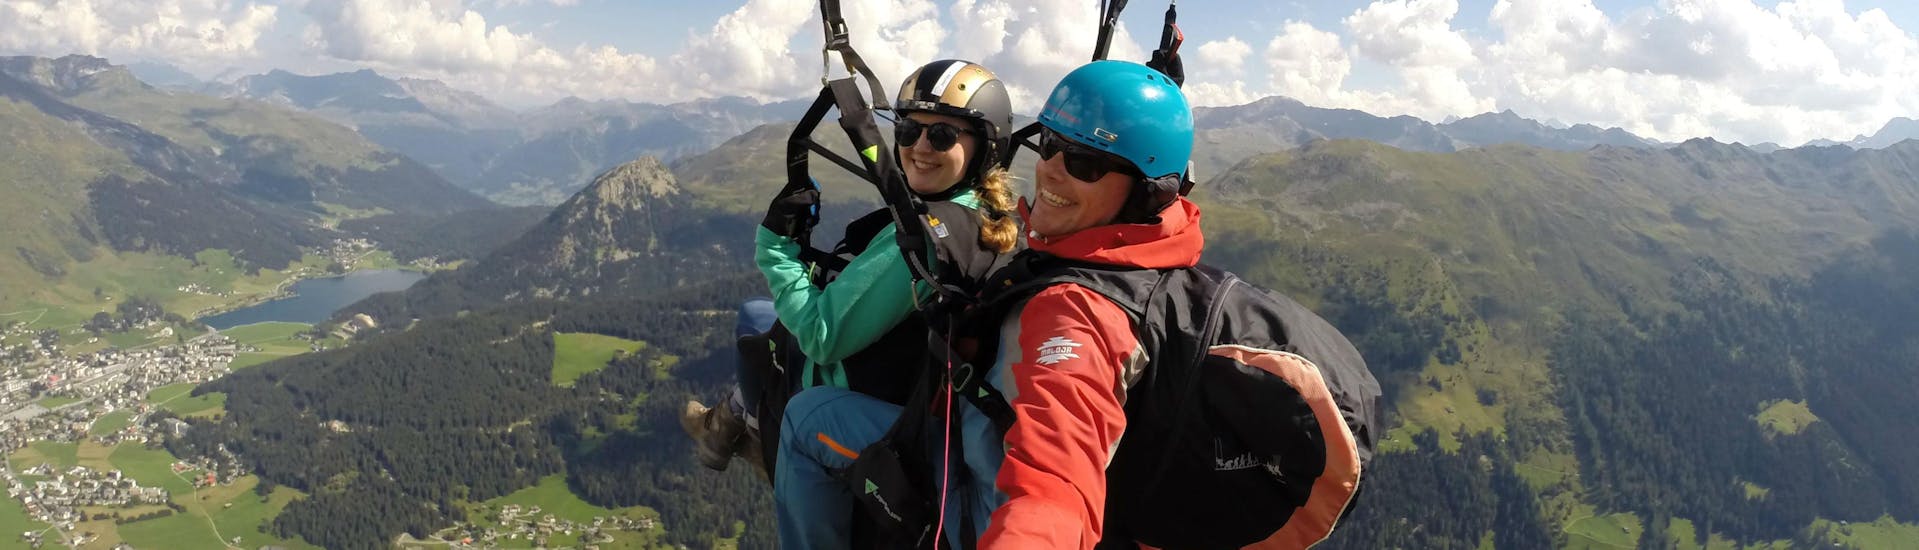 Classic Tandem Paragliding in Davos Klosters.